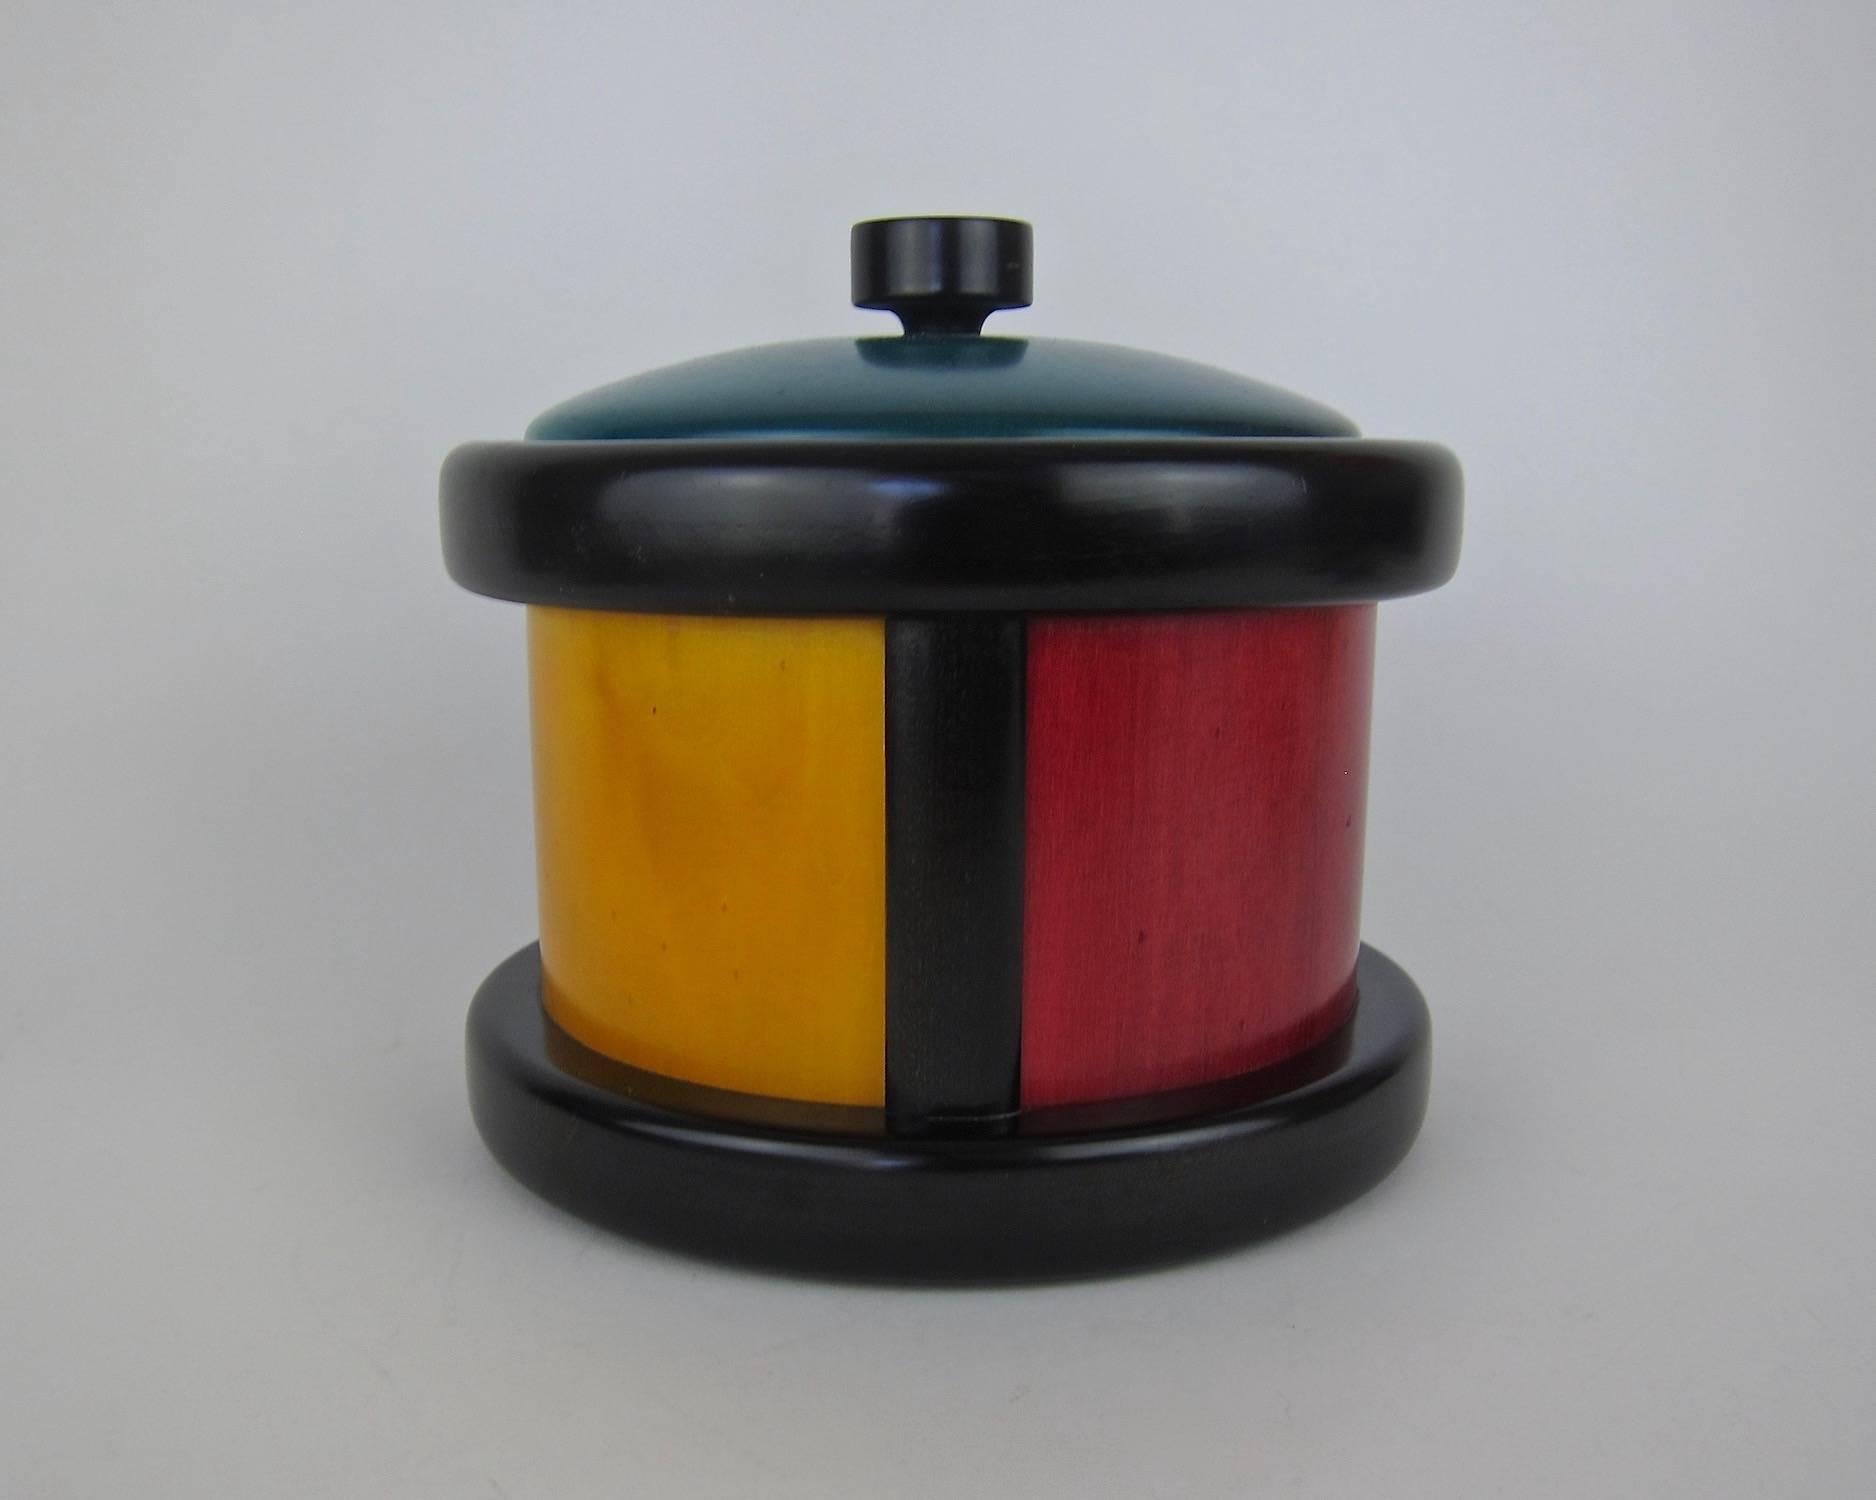 A colorful midcentury woodenware ice bucket designed by Pietro Manzoni for Vietri of Bergamo, Italy. The vintage ice bucket was hand-made of Italian wood and decorated with bold color blocked panels in golden yellow, teal green, and dark red, framed